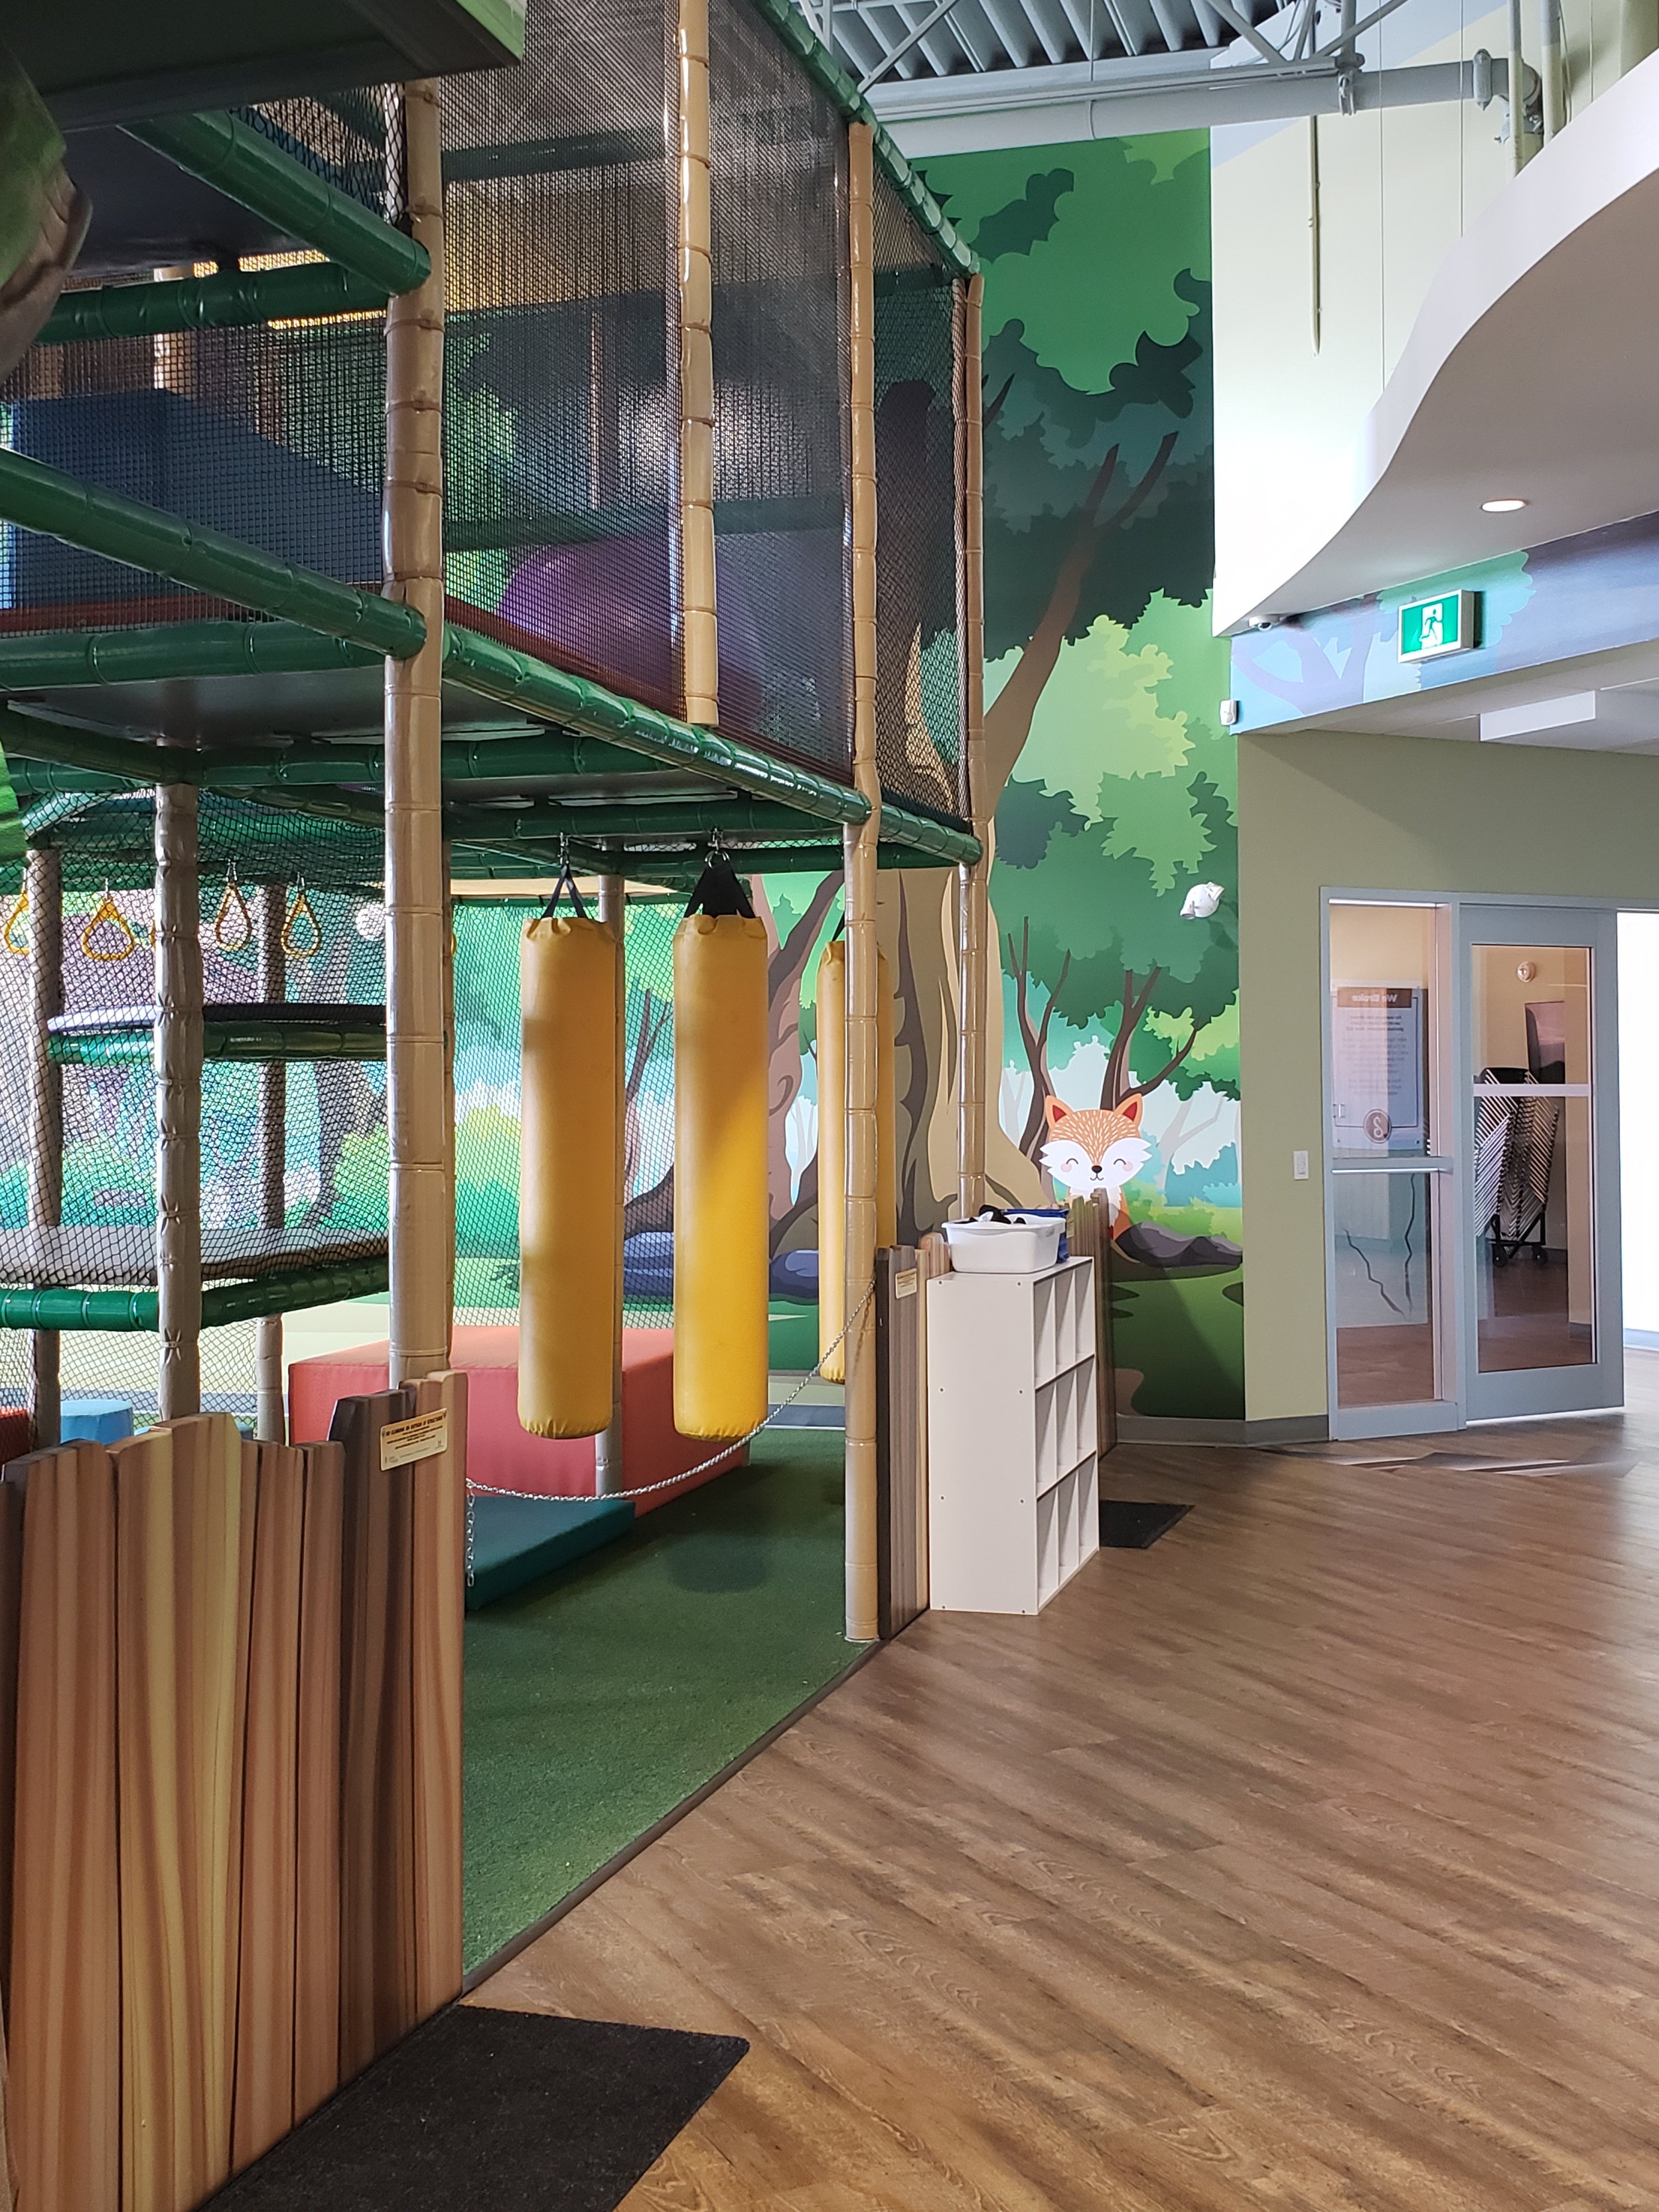 The Woodlot Indoor Playground &amp; Sprouts Classroom